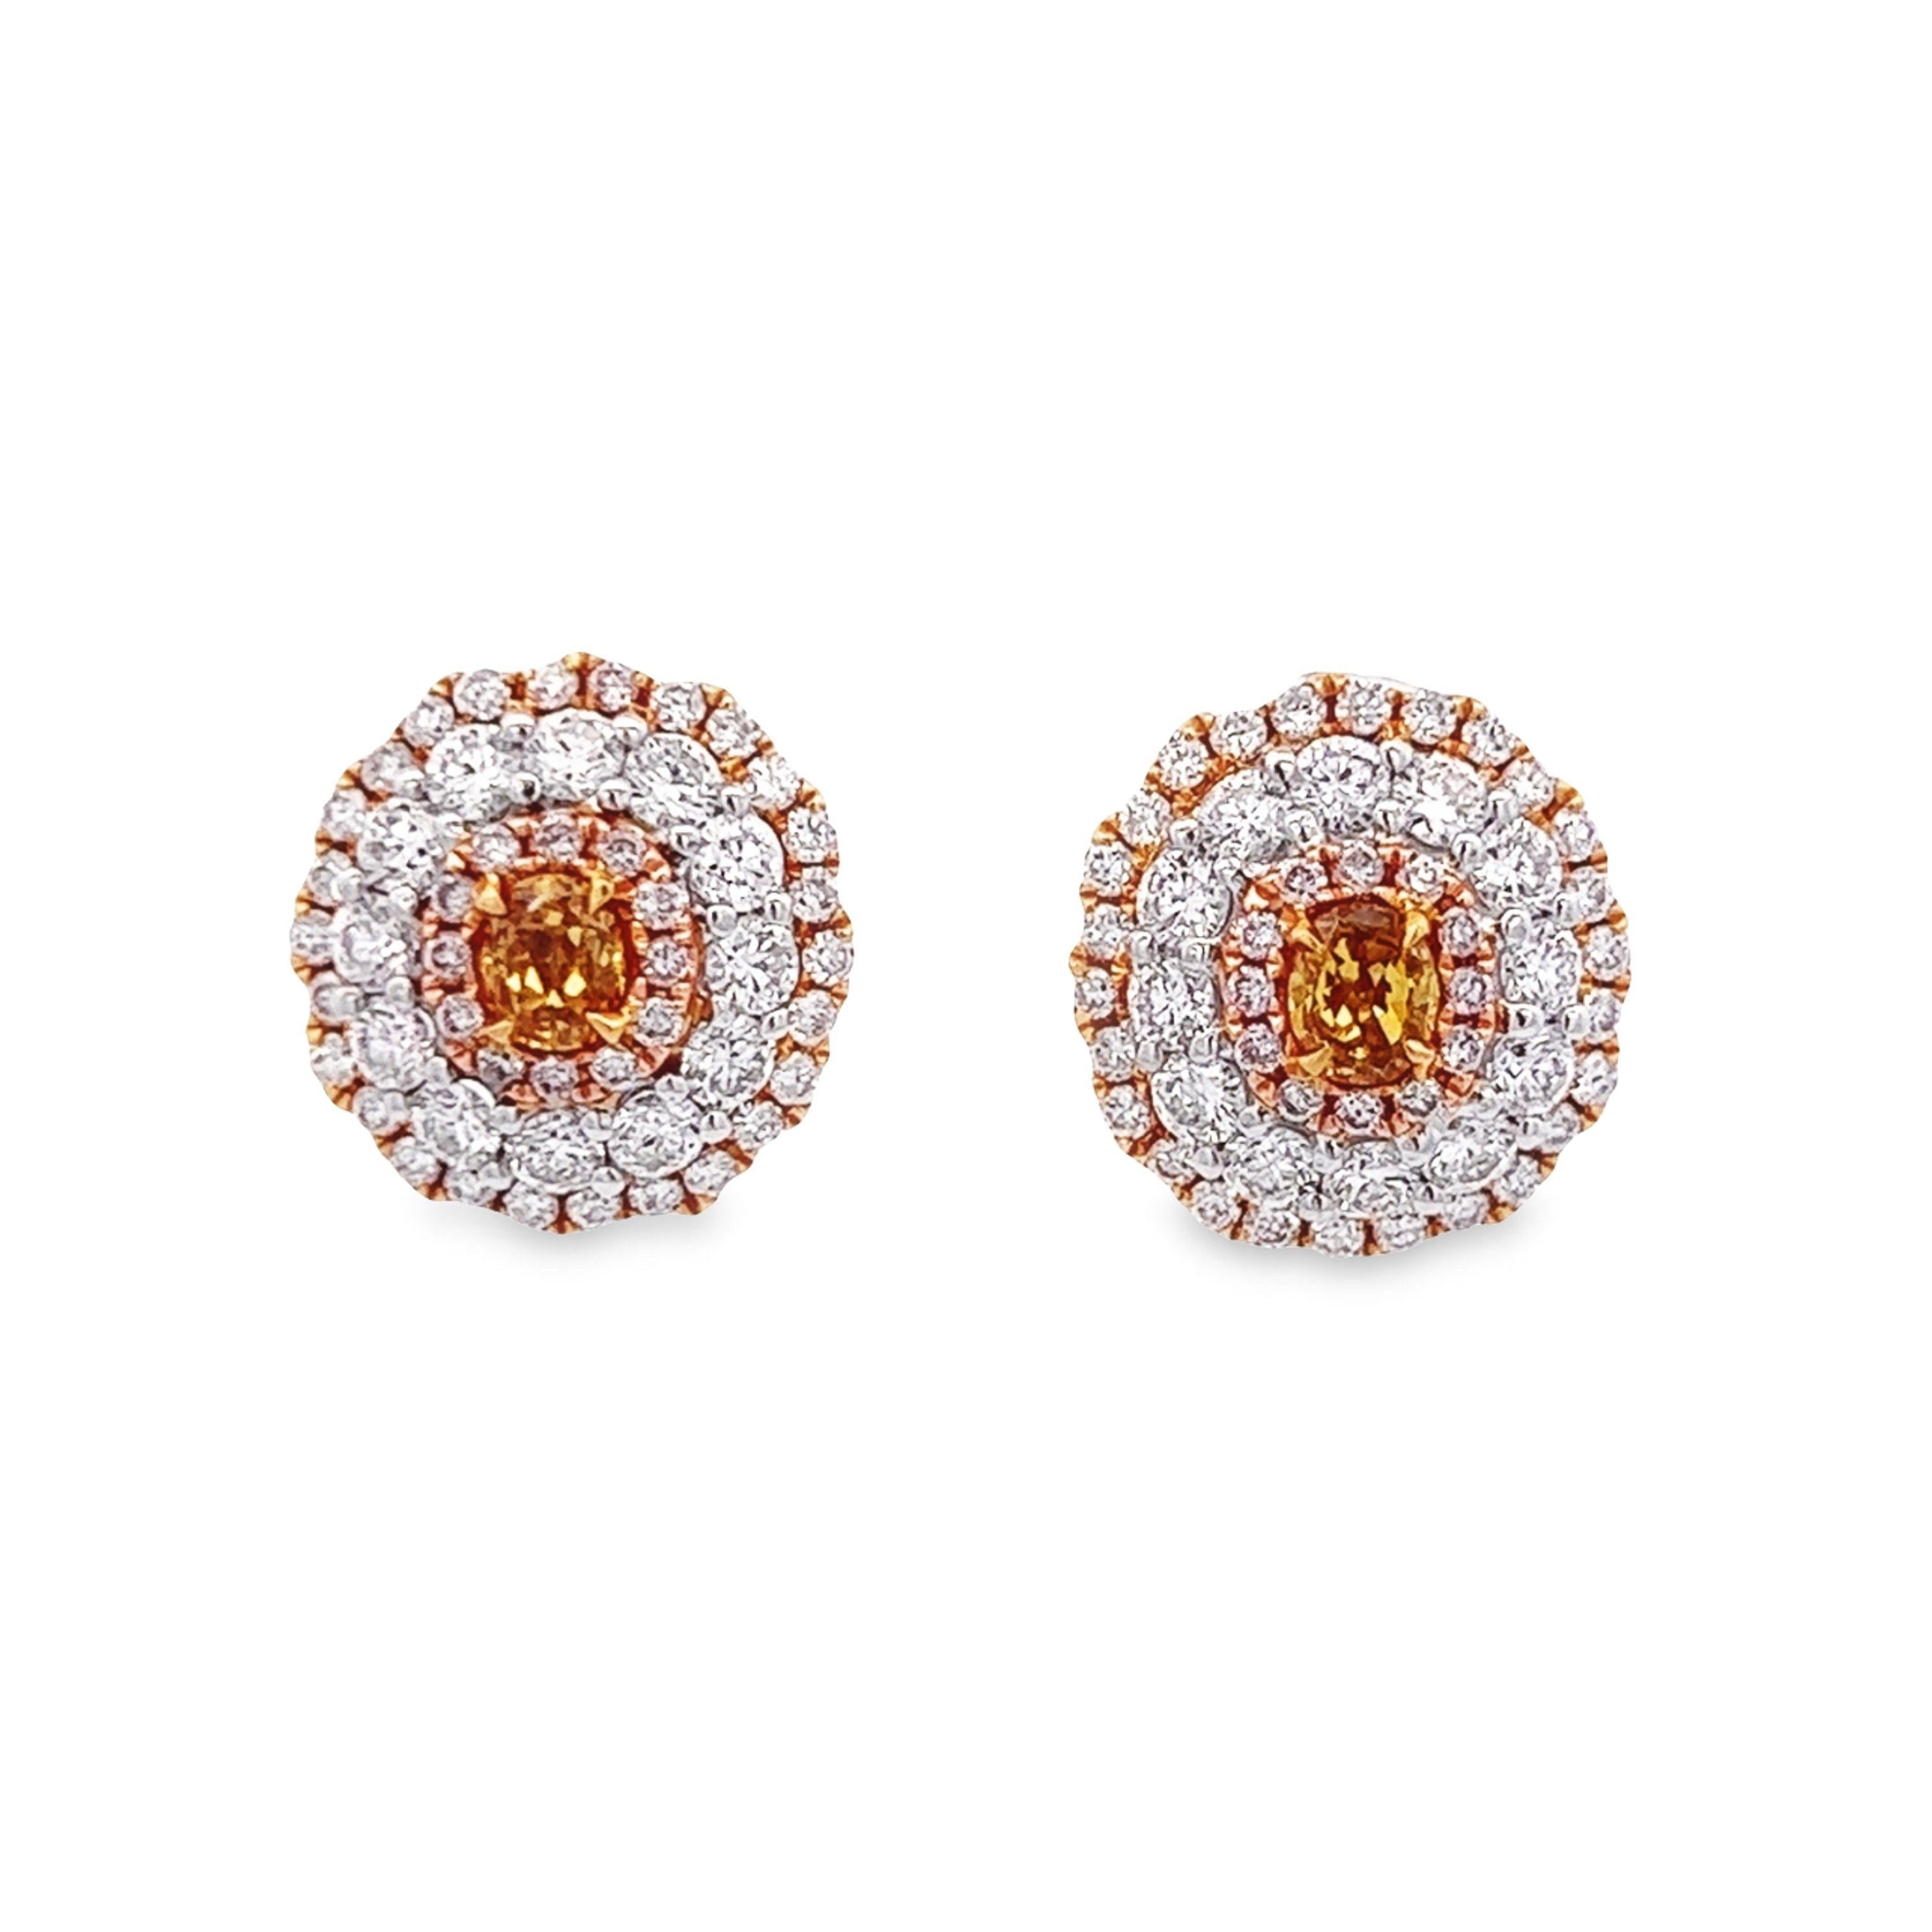 Stunning fancy color diamond triple halo earrings, by Alexander Beverly Hills.
1.91 carats total diamond weight. 
2 canter oval diamonds, 0.40. Approximately Fancy Intense Orange Brown. Complimented by 124 round brilliant diamonds, 1.65 carats.